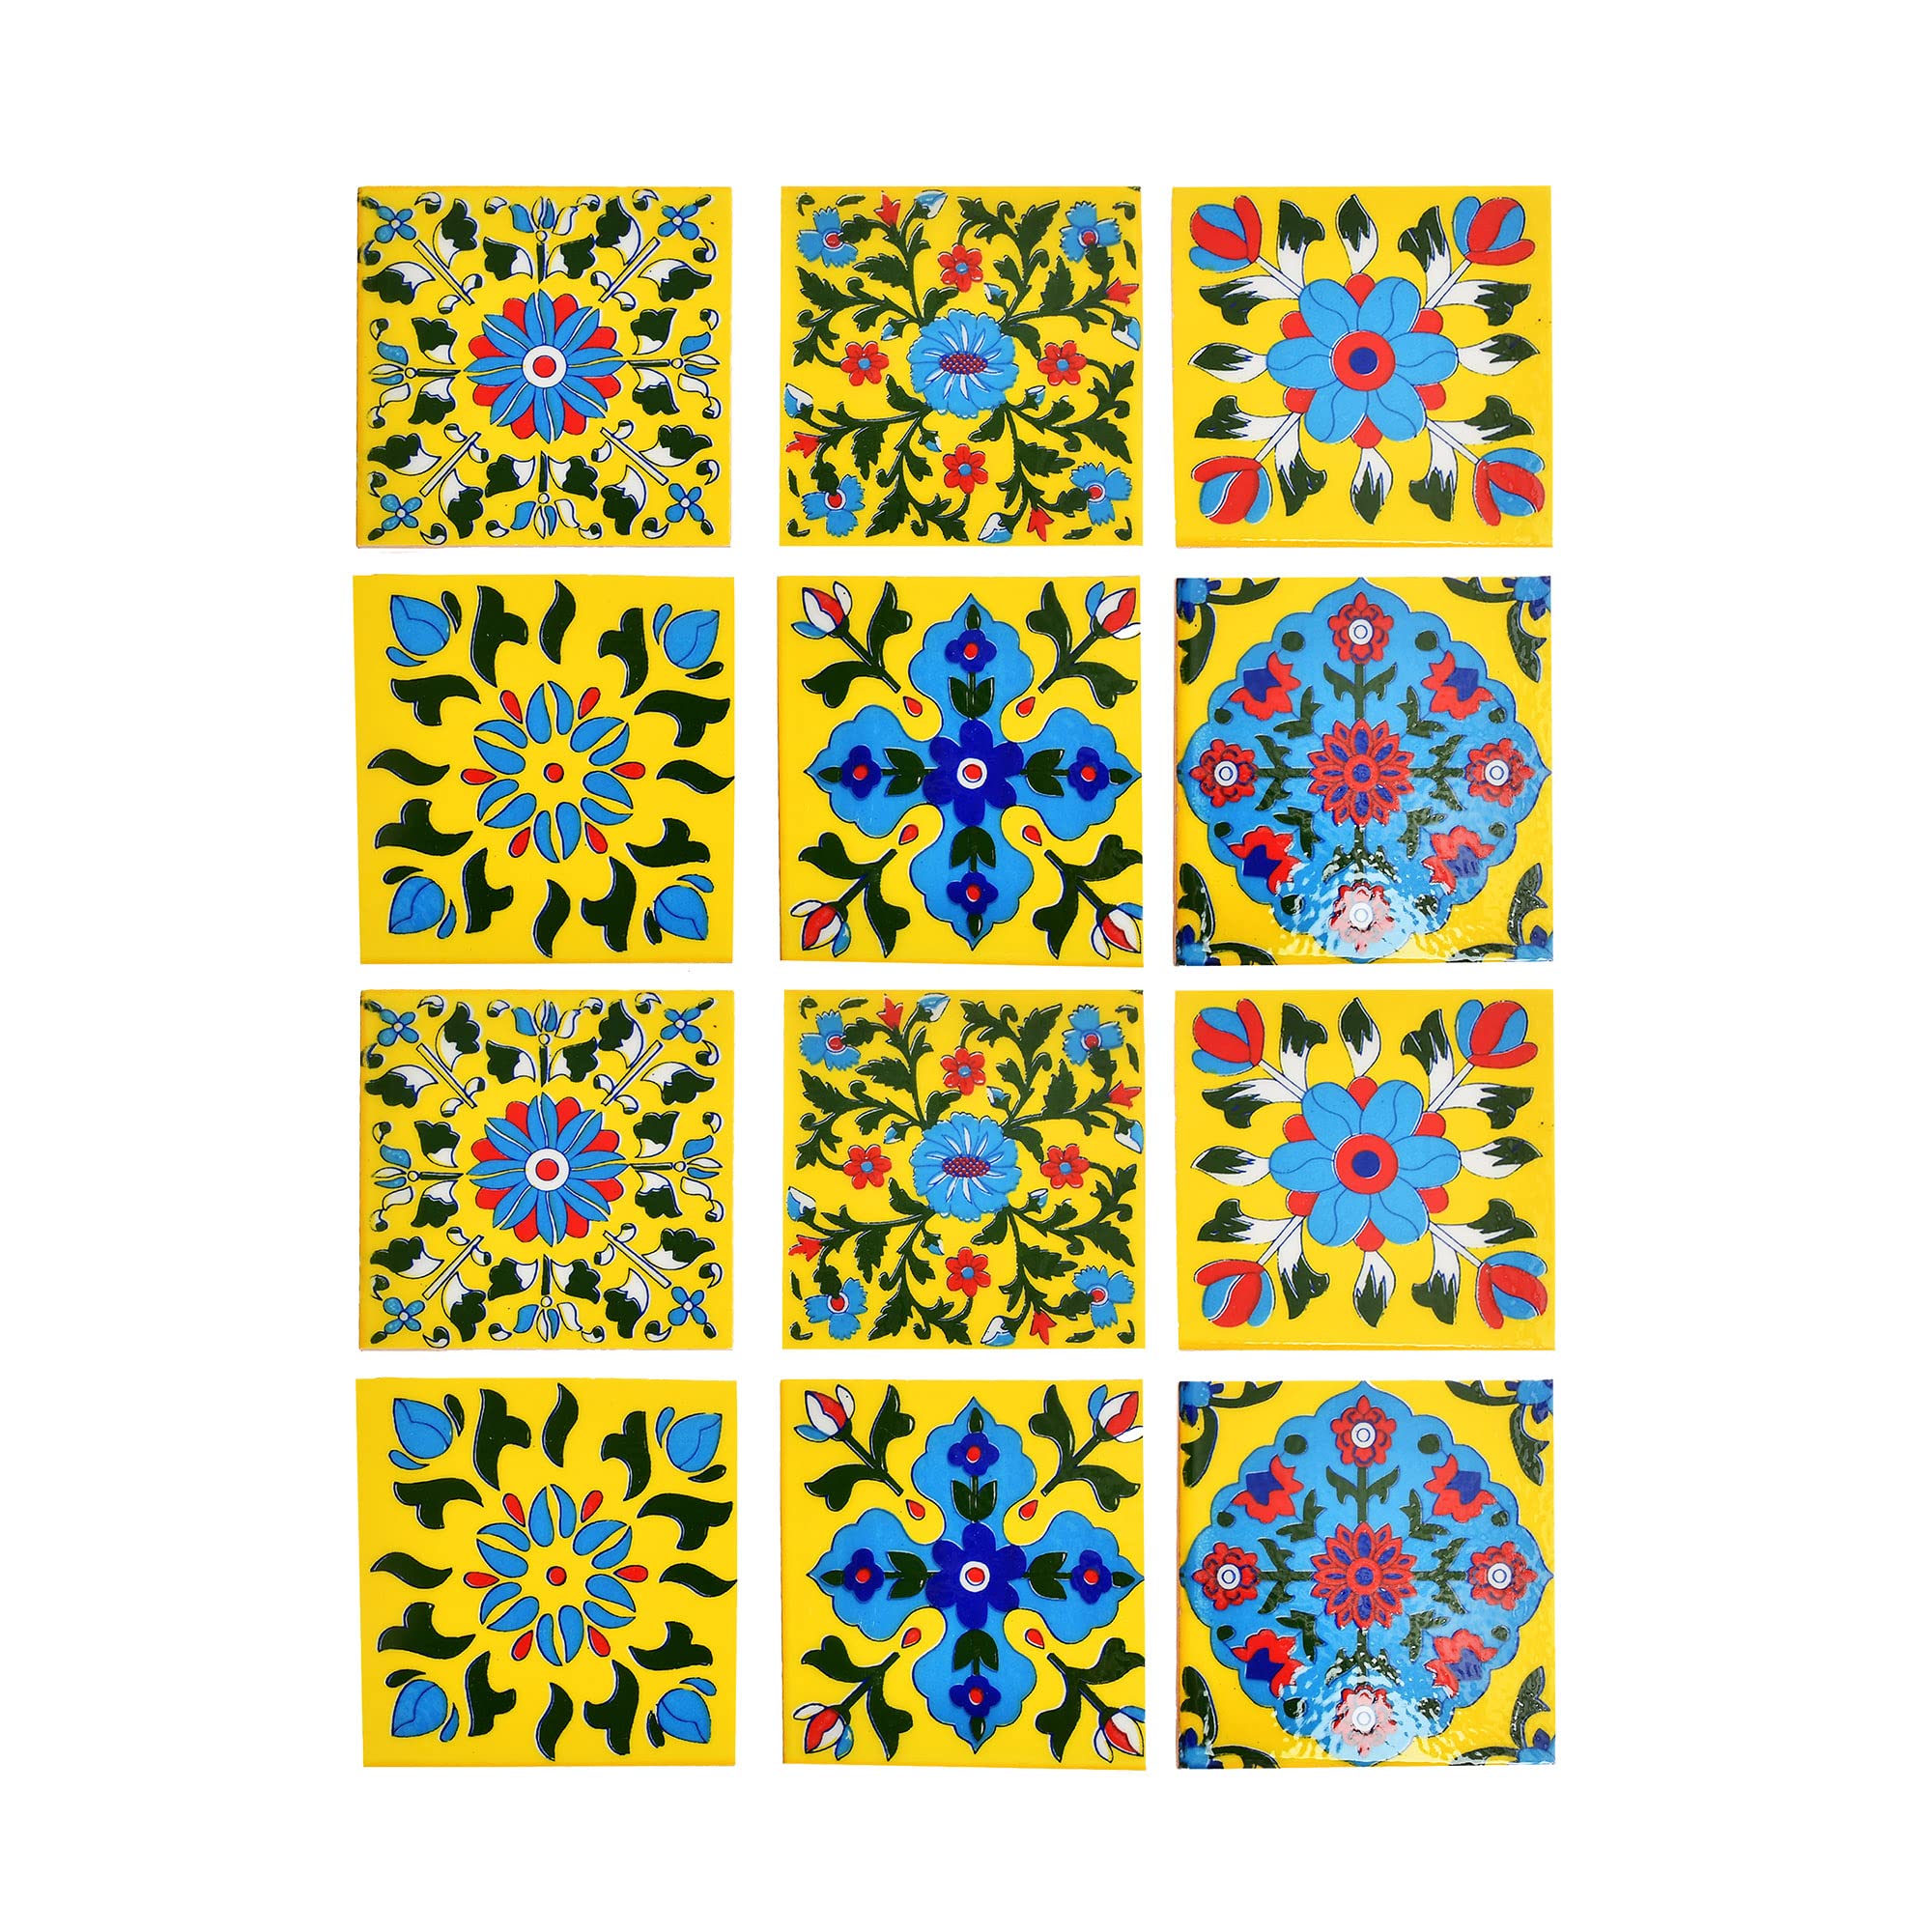 Artook Decor Wall Blue Tiles Multicolor Flower Design Ceramic Tiles Mural Panel Kitchen Washroom Mosaic Tile (Yellow, 4x4-inches Set of 12) 4x4-inches Set of 12 Yellow